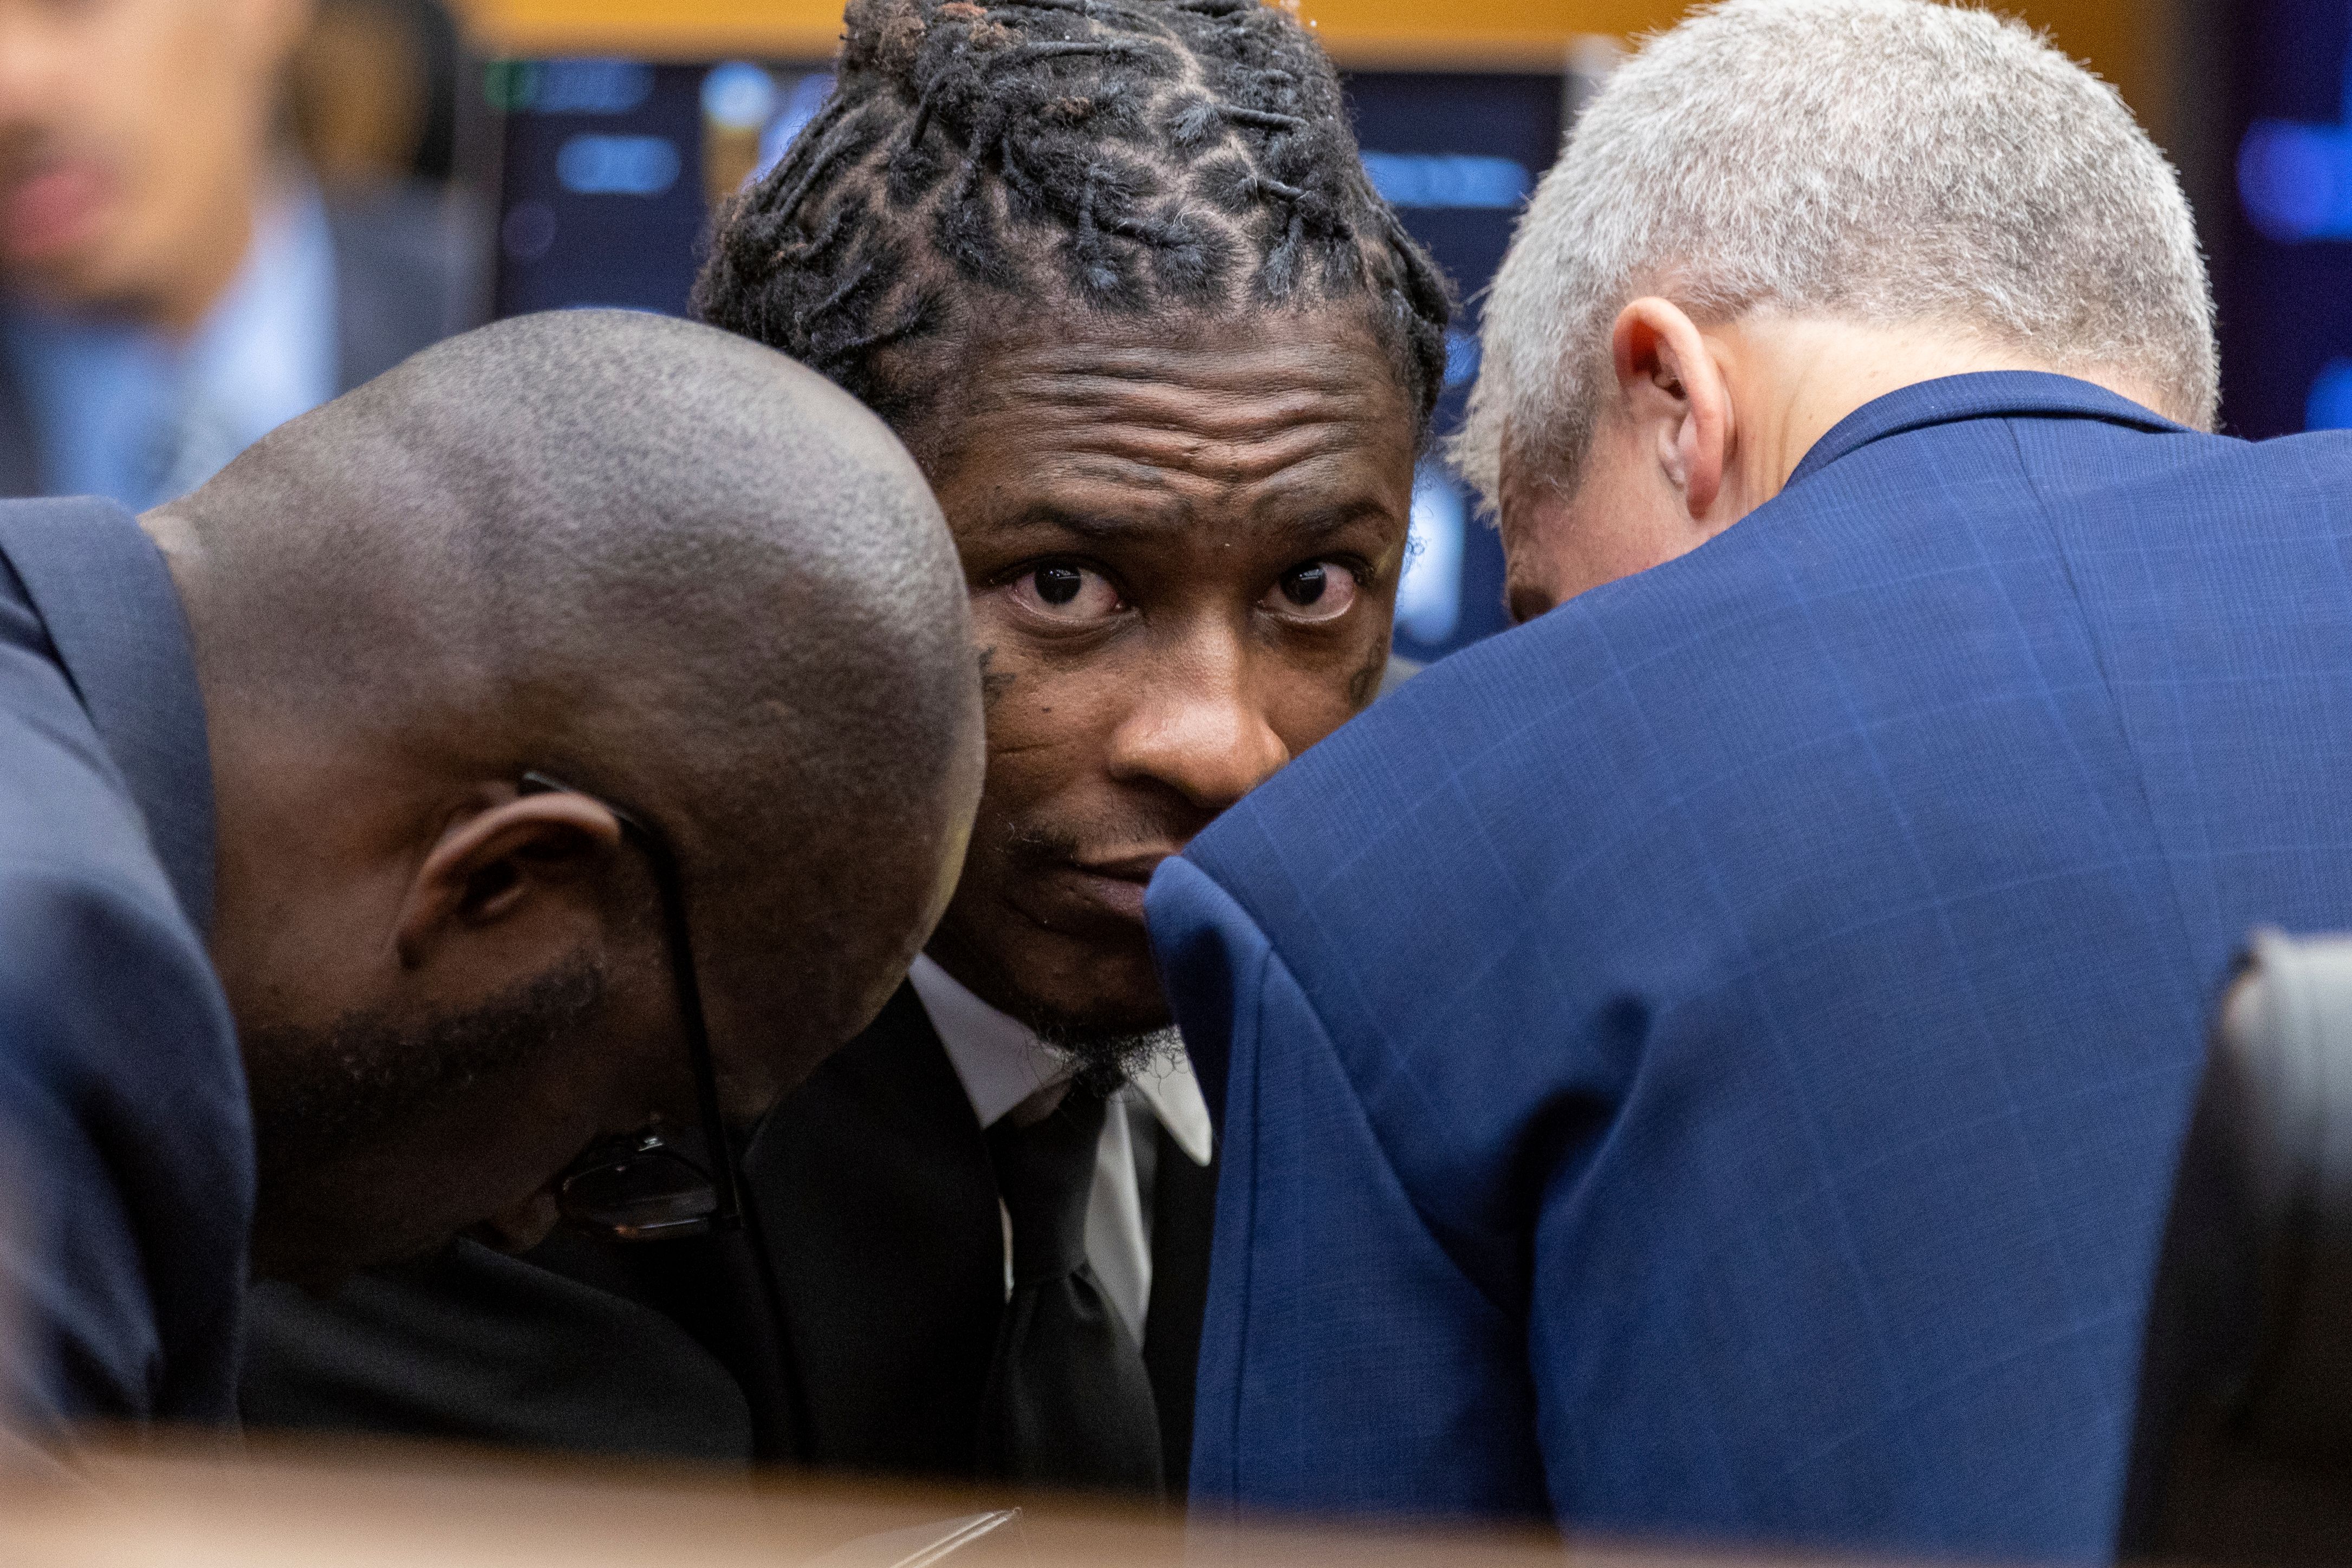 Atlanta rapper Young Thug, whose real name is Jeffery Williams, speaks with his attorneys Keith Adams, left, and Brian Steel, right, at the Fulton County courthouse in Atlanta on Thursday, Dec. 15, 2022. He was indicted in a RICO case earlier this year.